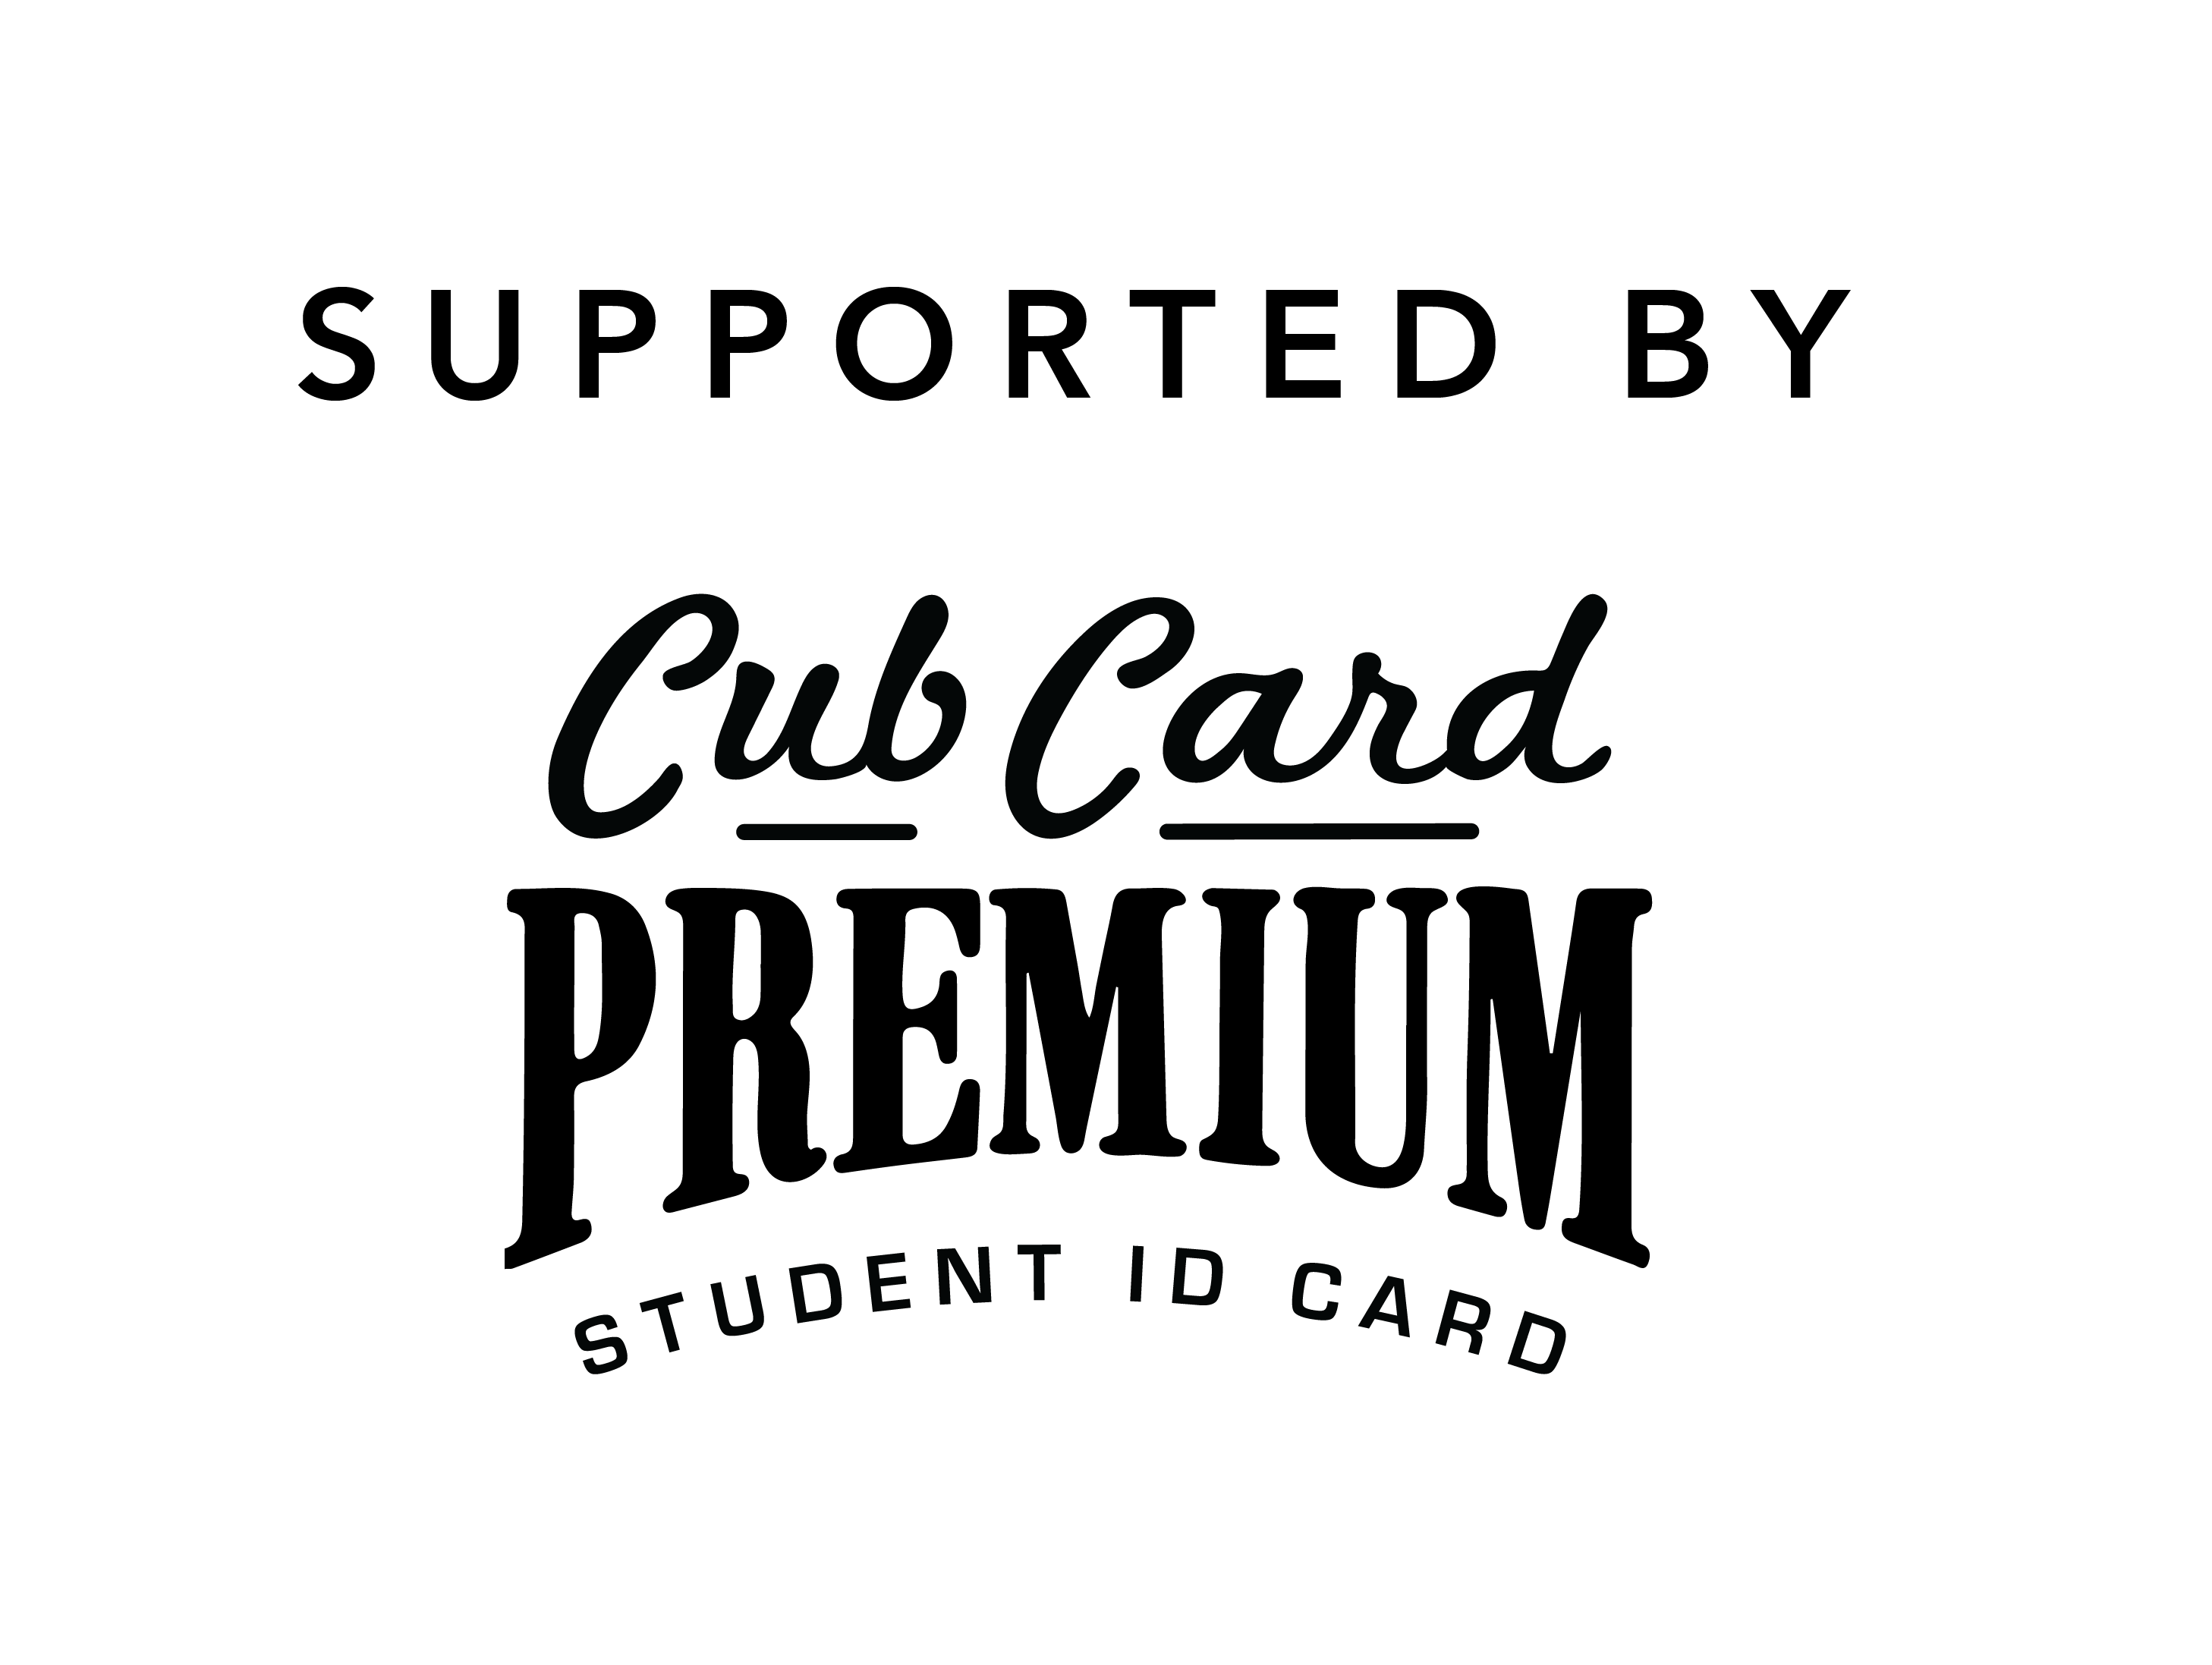 Supported by CubCard Premium